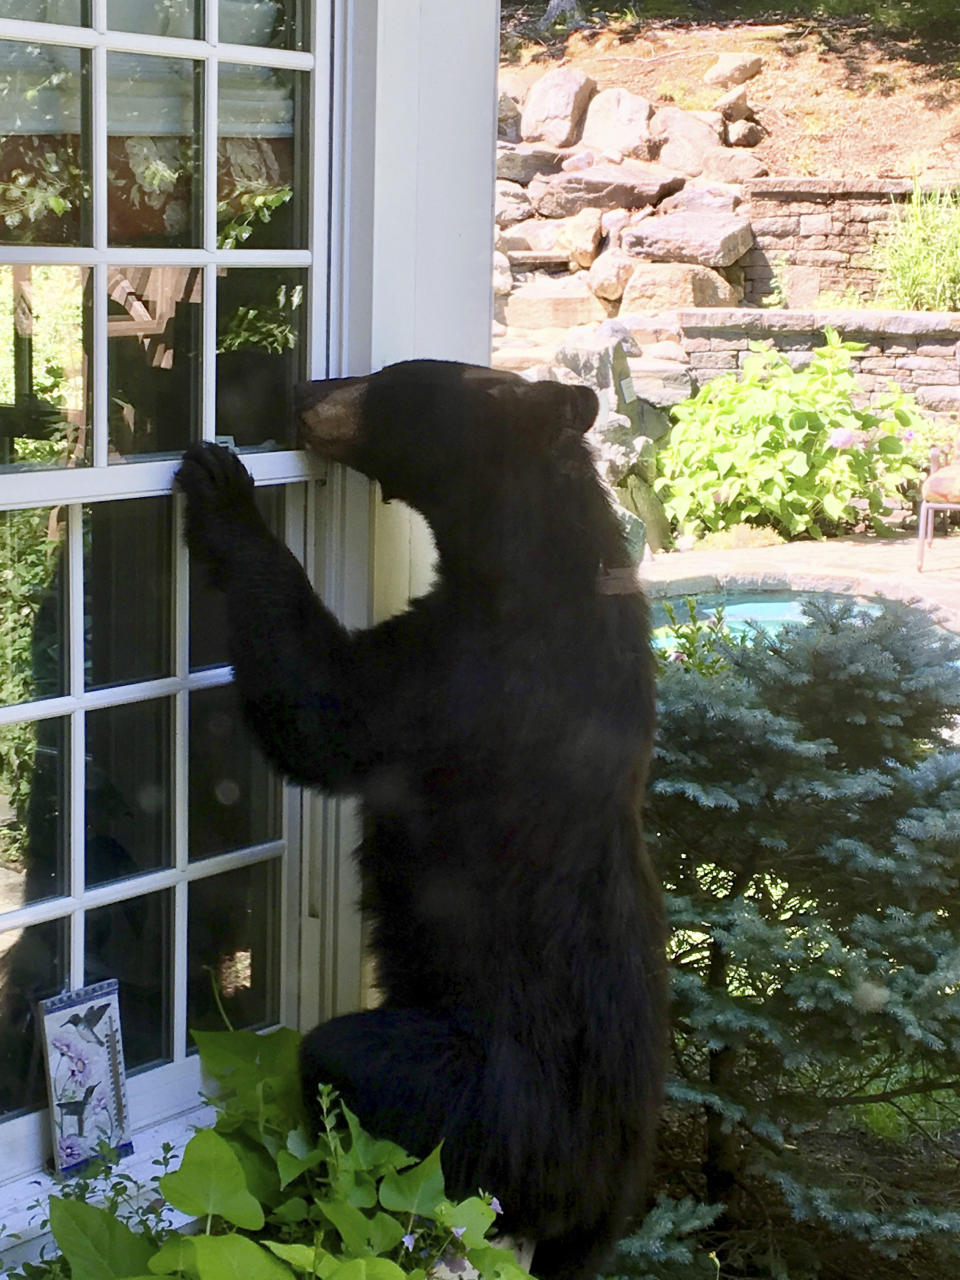 In this July 18, 2018 photo provided by Julie Sonlin, a black bear explores the yard of Steve and Julie Sonlin in Avon, Conn. The Sonlins said they get visits from bears several times a year and the state reports that human encounters with bears are on the rise. A wildlife biologist with the state Department of Energy and Environmental Protection says there have been about two dozen reports this year of bears breaking into Connecticut homes and businesses, about four times the yearly average. (Julie Sonlin via AP)